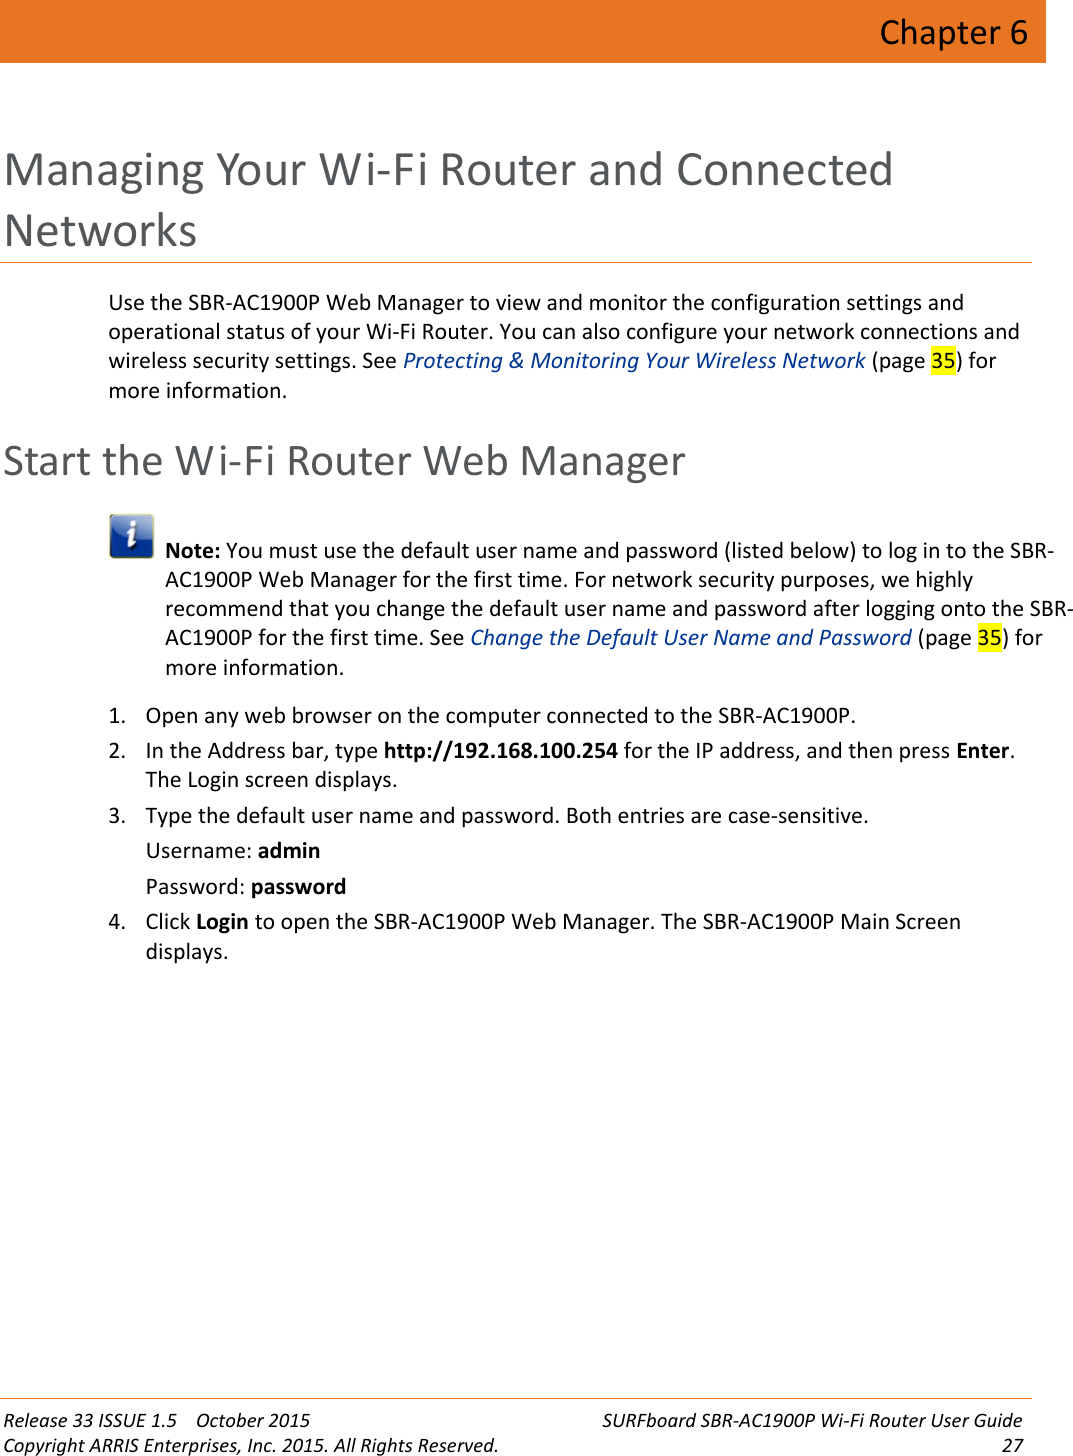 Release 33 ISSUE 1.5 October 2015 SURFboard SBR-AC1900P Wi-Fi Router User GuideCopyright ARRIS Enterprises, Inc. 2015. All Rights Reserved. 27Chapter 6Managing Your Wi-Fi Router and ConnectedNetworksUse the SBR-AC1900P Web Manager to view and monitor the configuration settings andoperational status of your Wi-Fi Router. You can also configure your network connections andwireless security settings. See Protecting &amp; Monitoring Your Wireless Network (page 35) formore information.Start the Wi-Fi Router Web ManagerNote: You must use the default user name and password (listed below) to log in to the SBR-AC1900P Web Manager for the first time. For network security purposes, we highlyrecommend that you change the default user name and password after logging onto the SBR-AC1900P for the first time. See Change the Default User Name and Password (page 35) formore information.1. Open any web browser on the computer connected to the SBR-AC1900P.2. In the Address bar, type http://192.168.100.254 for the IP address, and then press Enter.The Login screen displays.3. Type the default user name and password. Both entries are case-sensitive.Username: adminPassword: password4. Click Login to open the SBR-AC1900P Web Manager. The SBR-AC1900P Main Screendisplays.